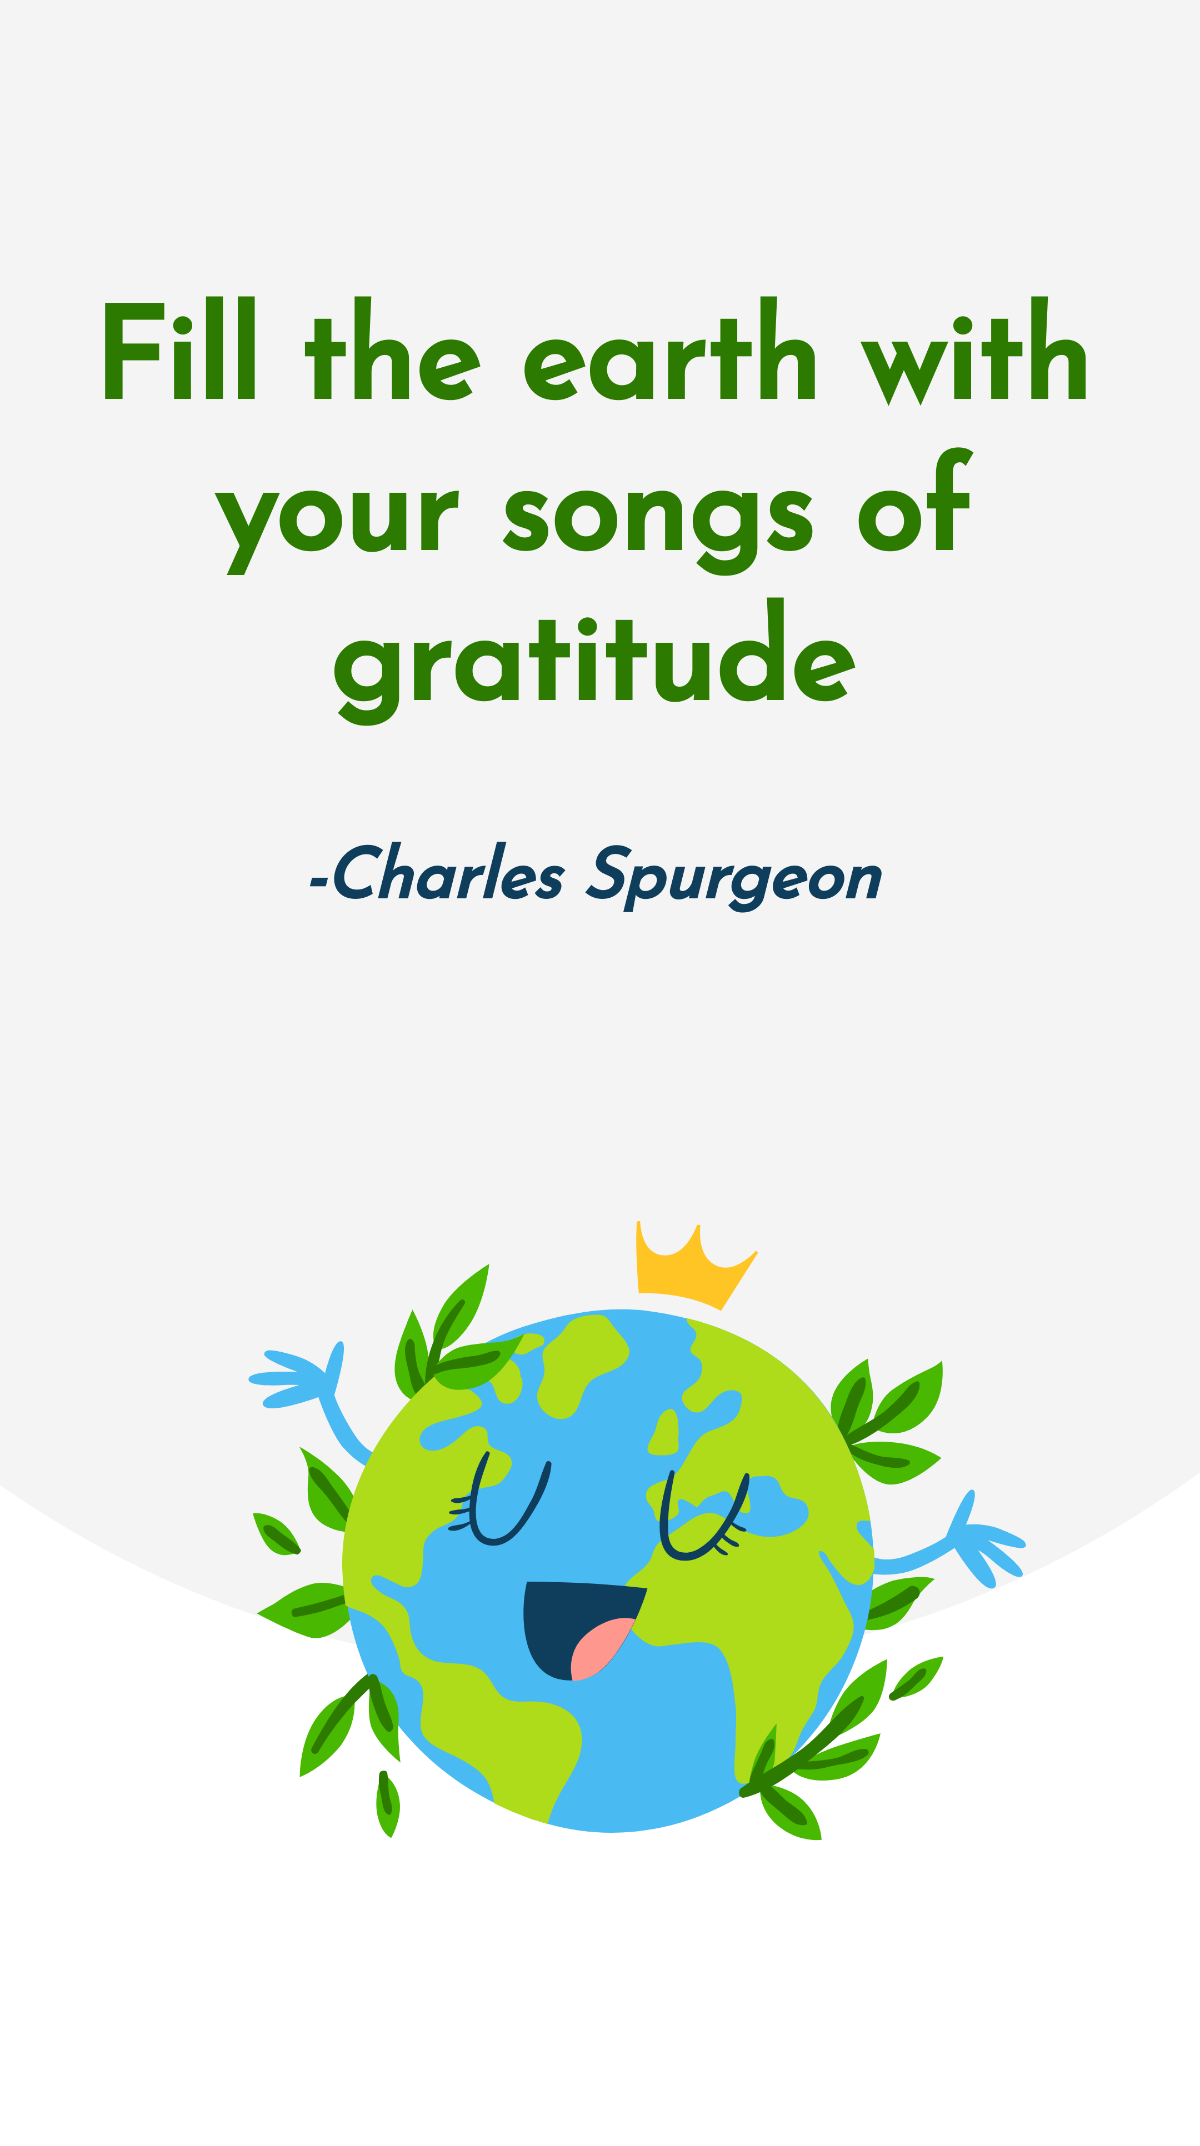 Charles Spurgeon - Fill the earth with your songs of gratitude